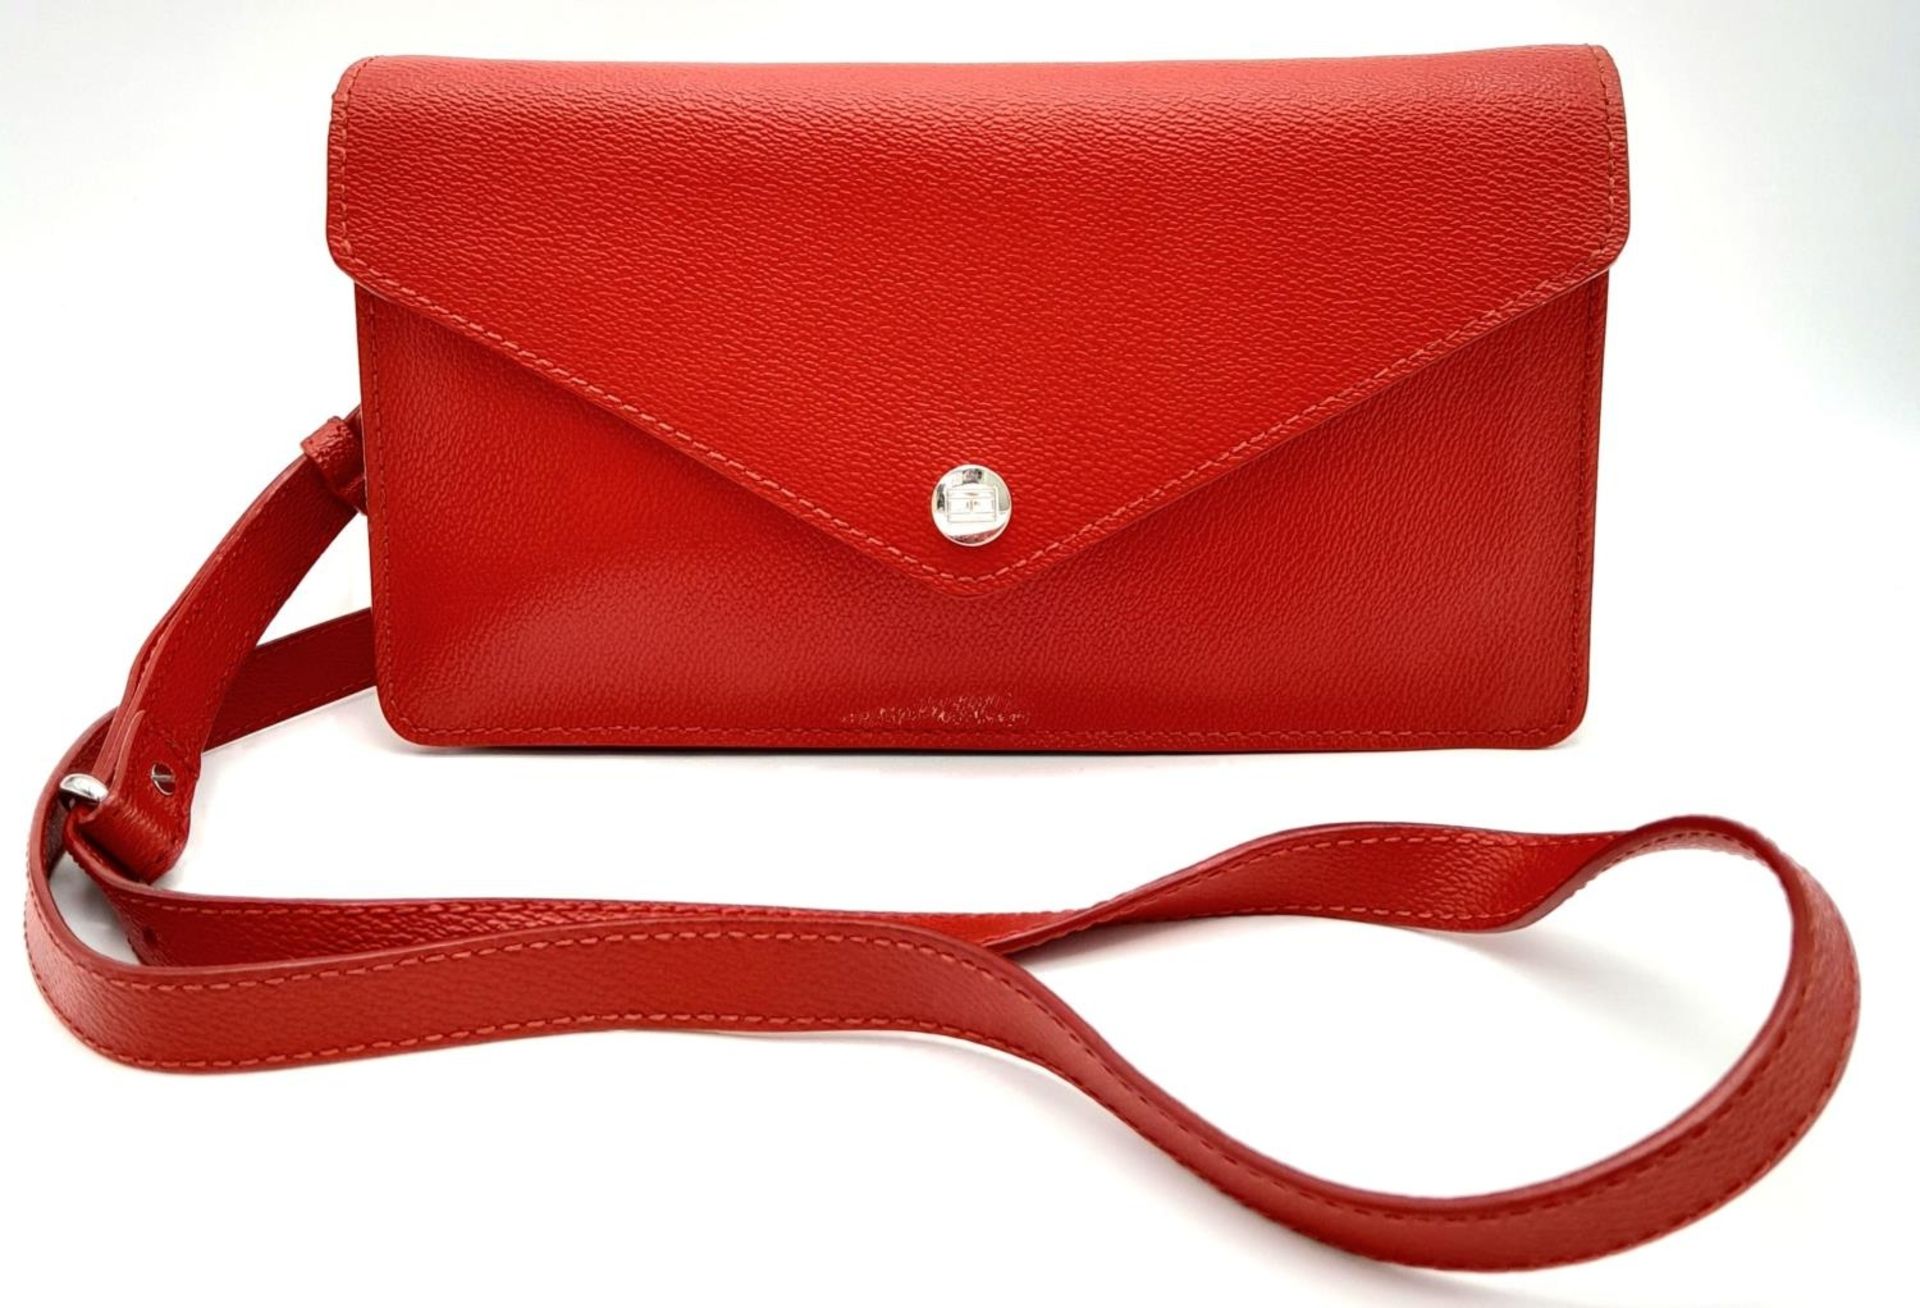 A Tommy Hilfiger Red Wallet Crossbody Bag. Leather exterior with silver-toned hardware, removeable